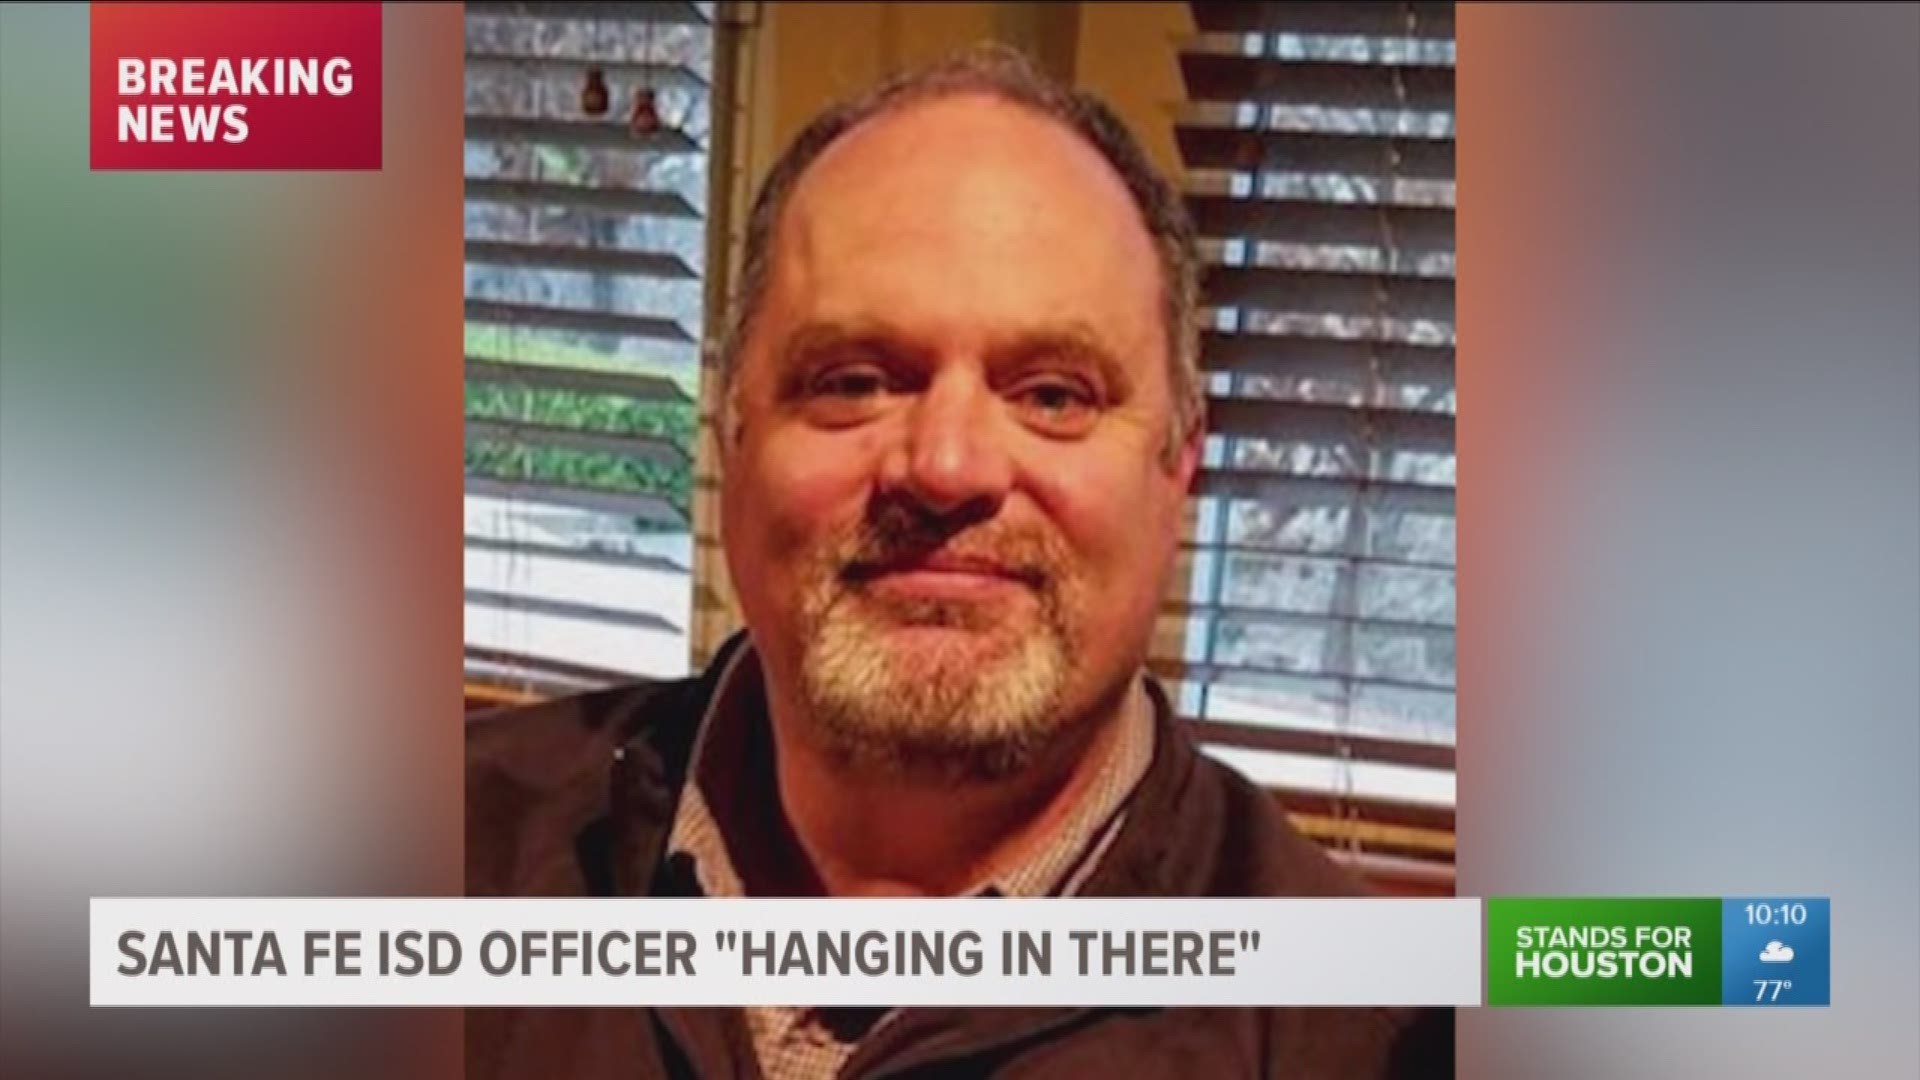 Houston Police Chief Art Acevedo says Santa Fe ISD Police Officer John Barnes is "hanging in there" after he was shot in the upper arm during the Santa Fe High School shooting.